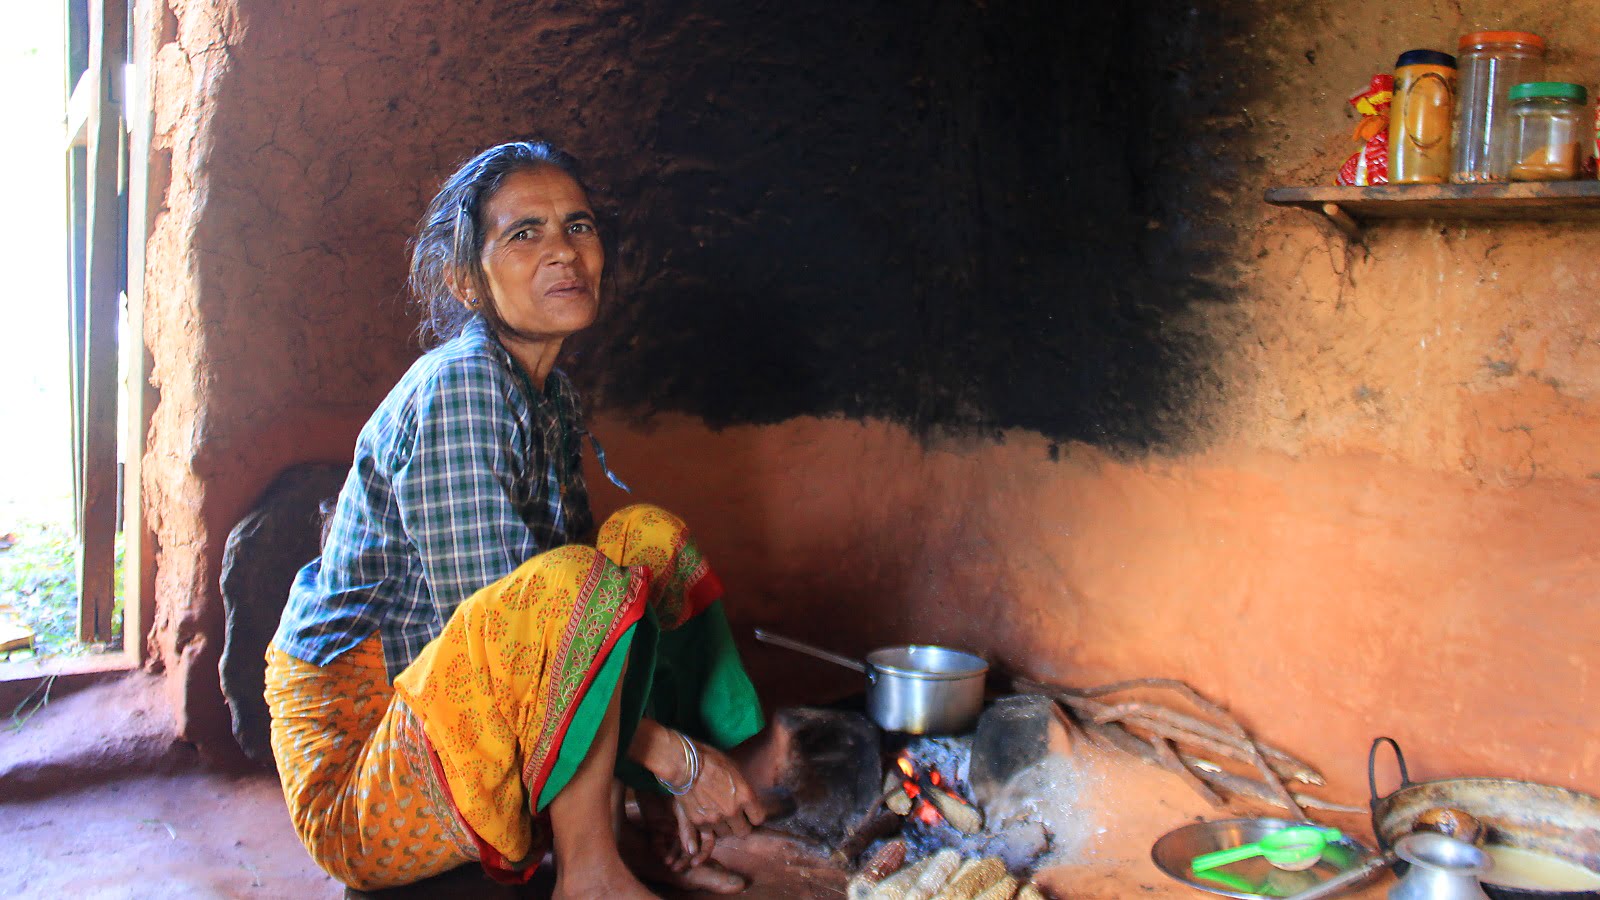 A Nepalese woman cooking food in a traditional ground stove.